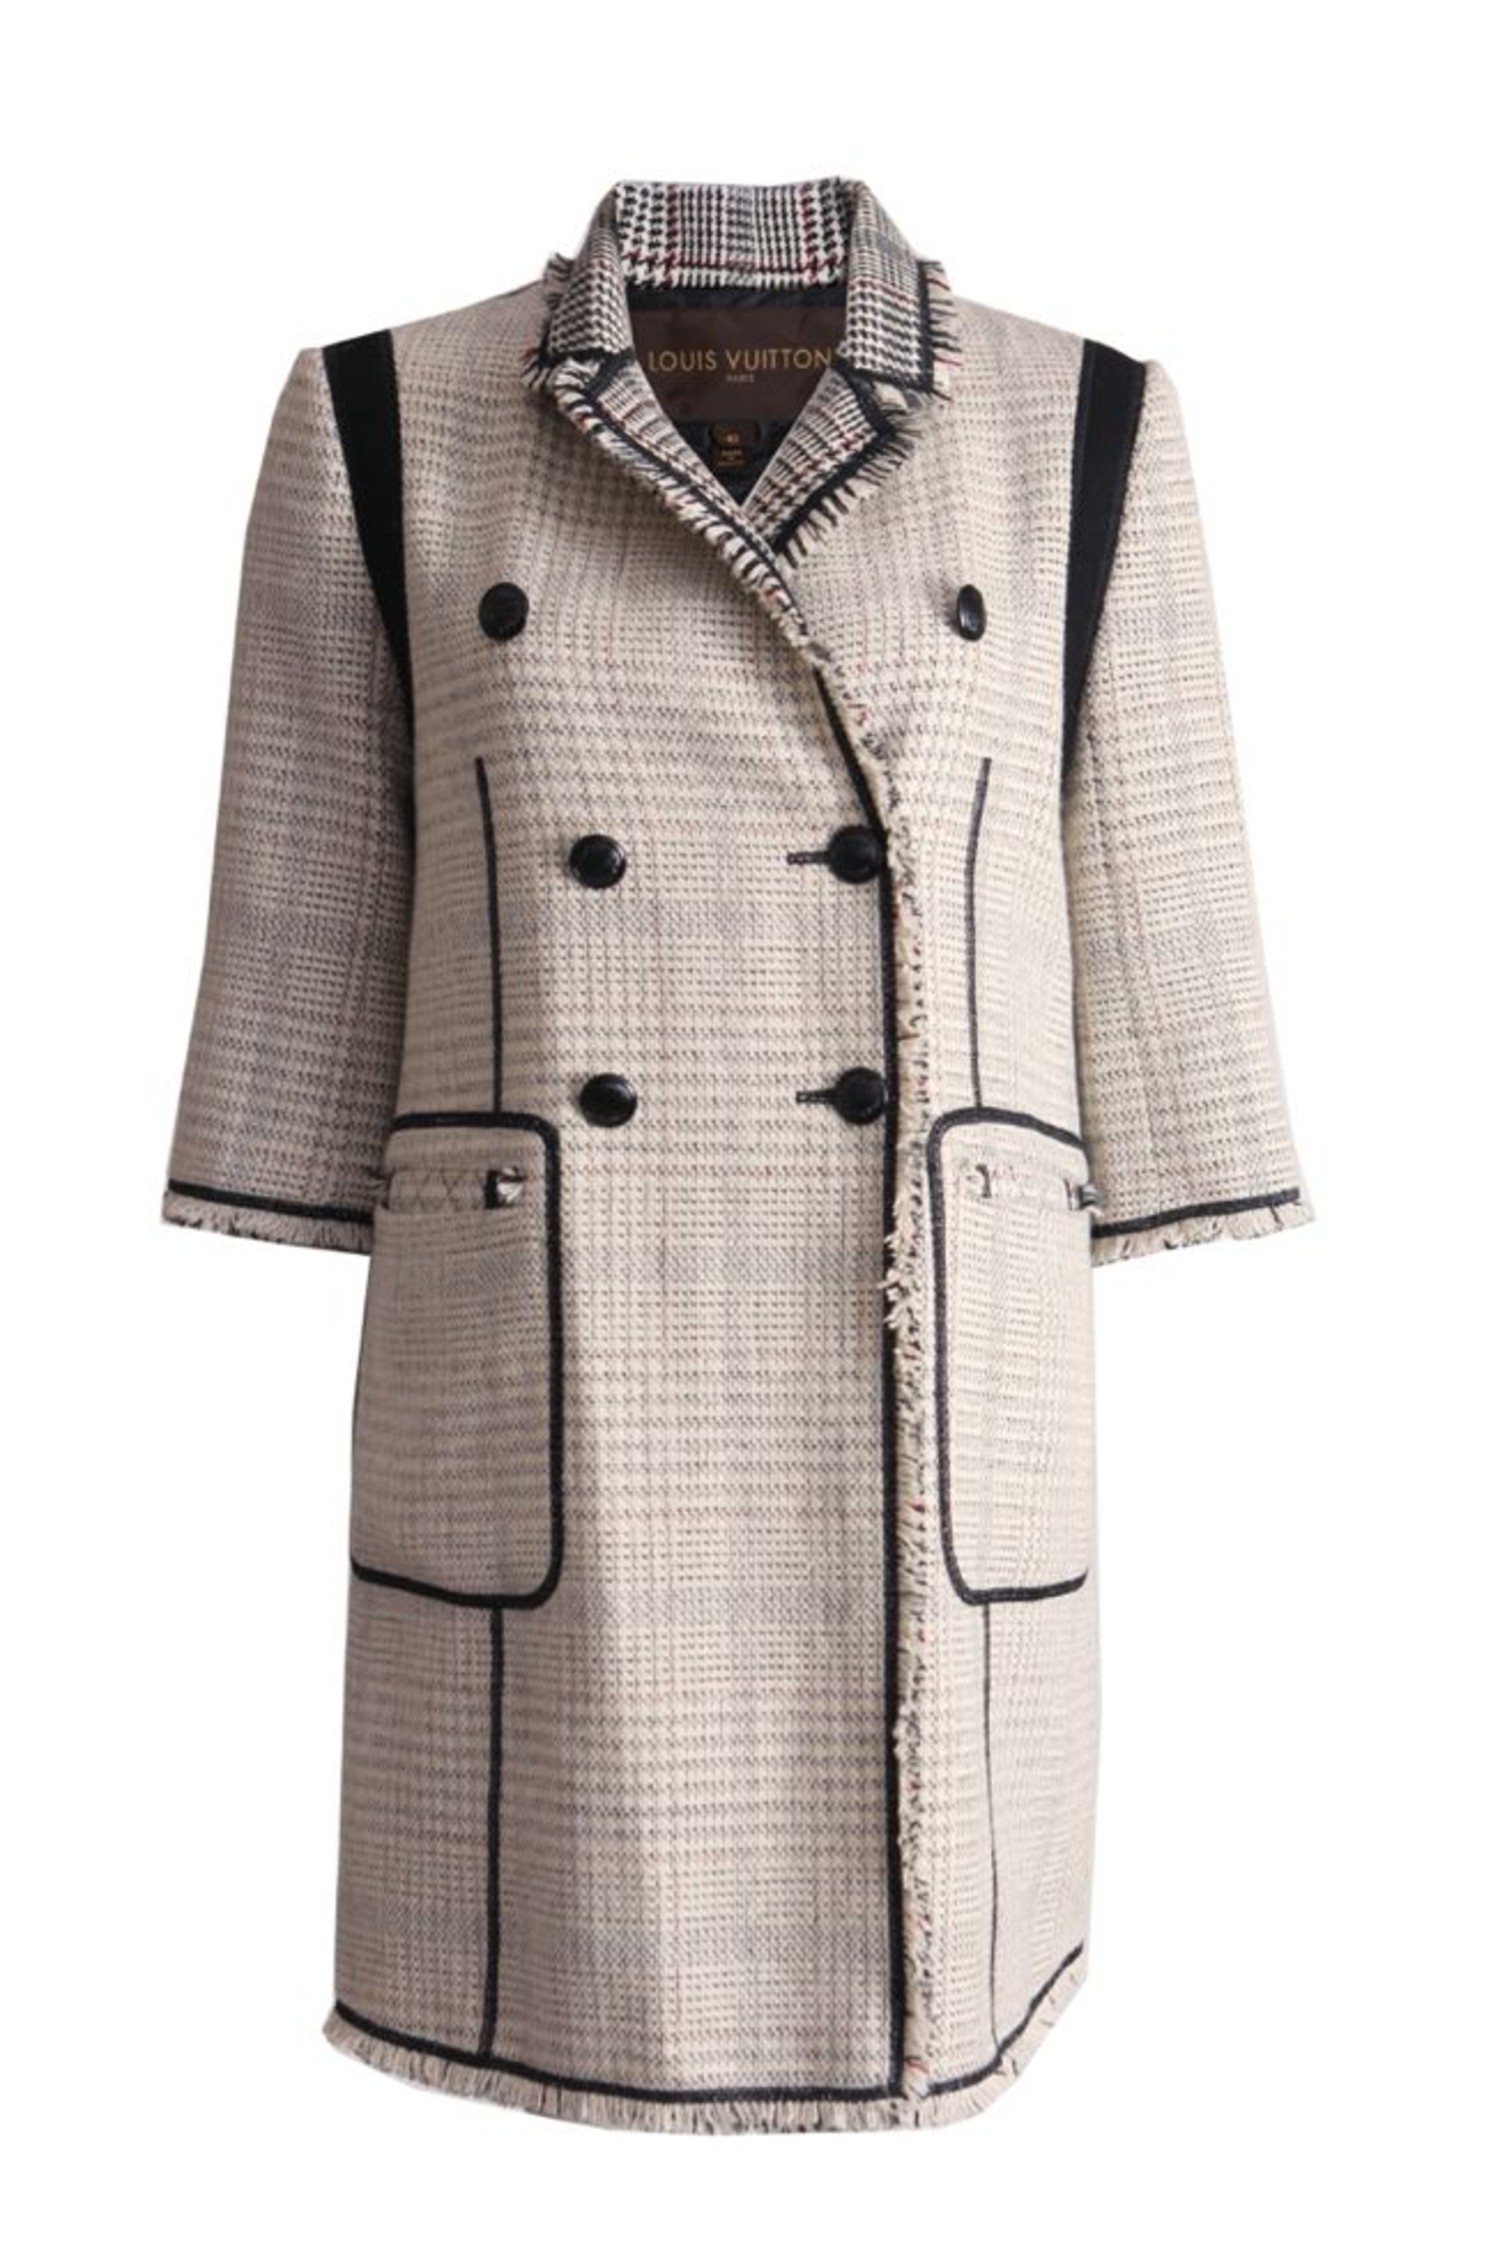 Louis Vuitton blackwhite tweed coat with ¾ sleeves in size FR40S   Unique Designer Pieces